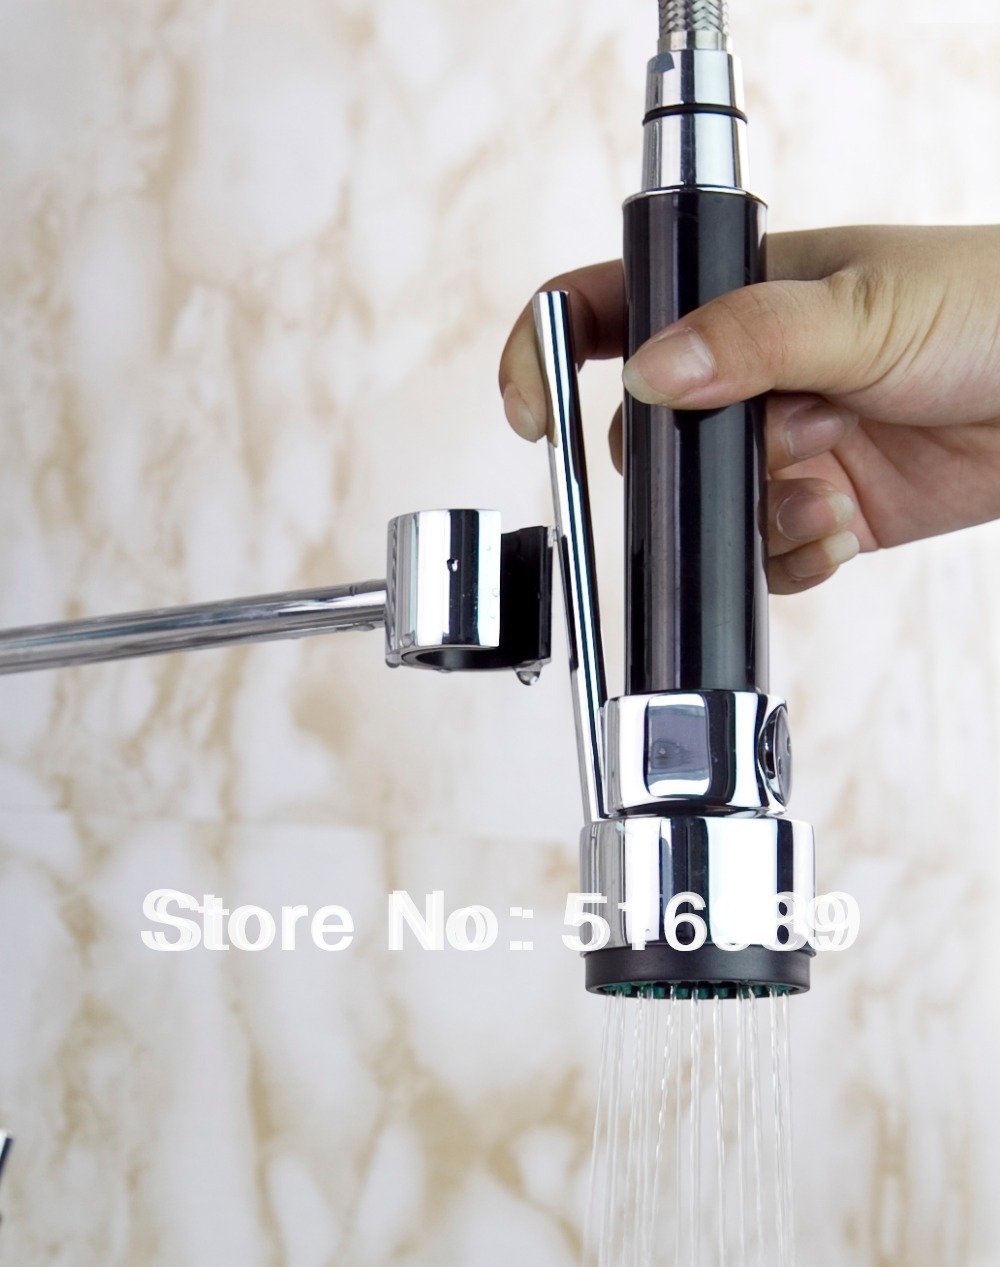 new chrome finsih pull out kitchen sink basin mixer tap swivel faucet abs spayer leon66